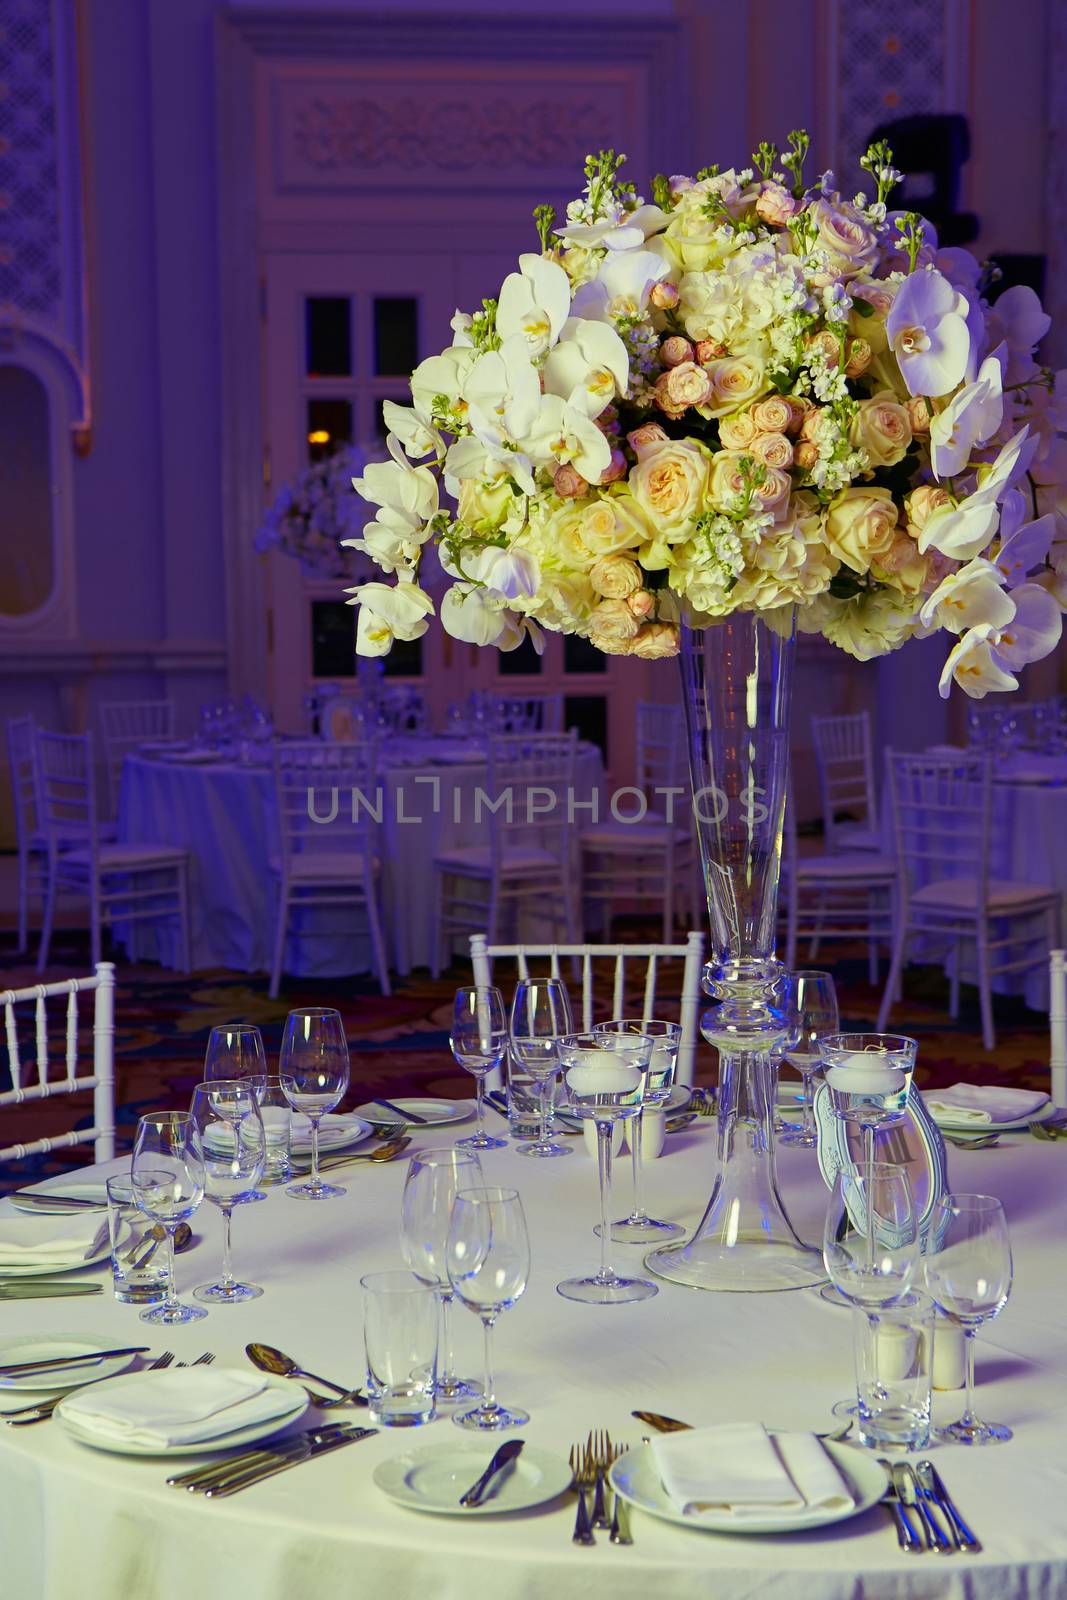 Beautiful flowers on table in wedding day